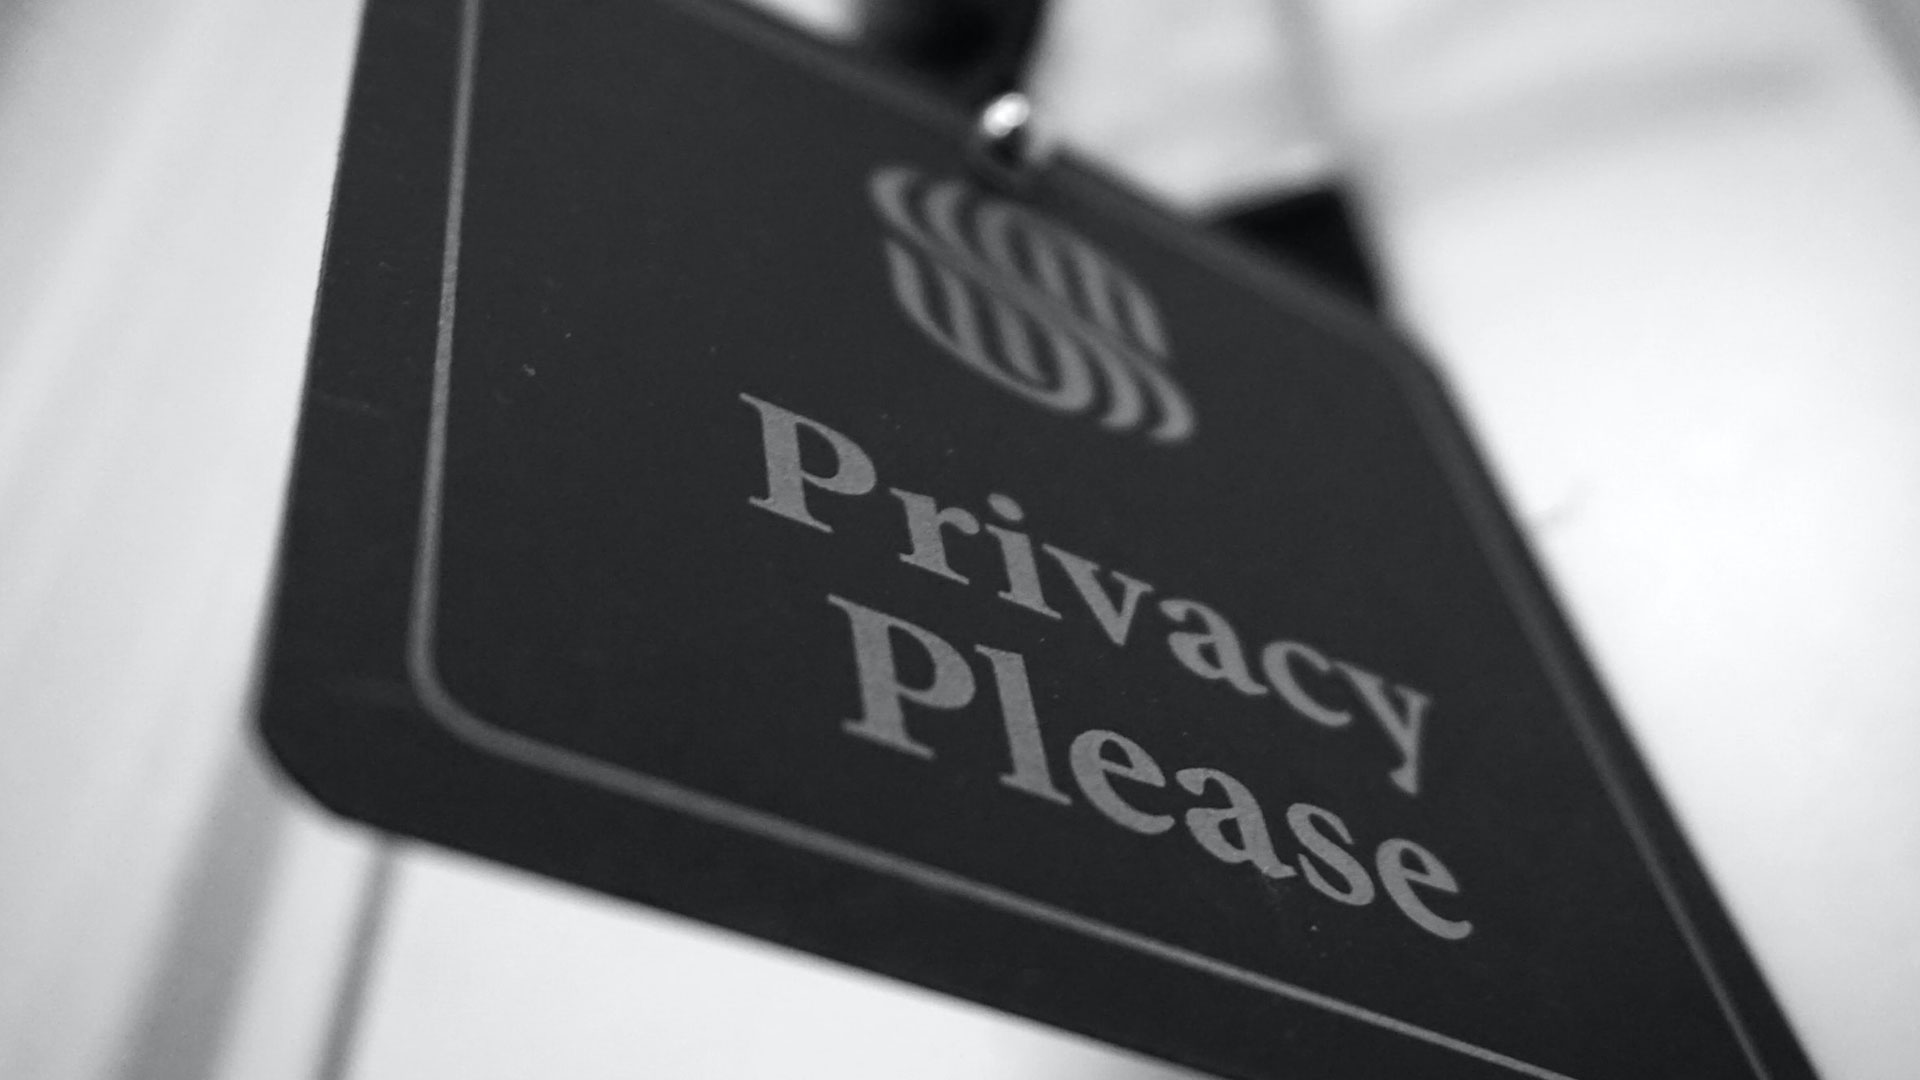 Privacy policy page banner